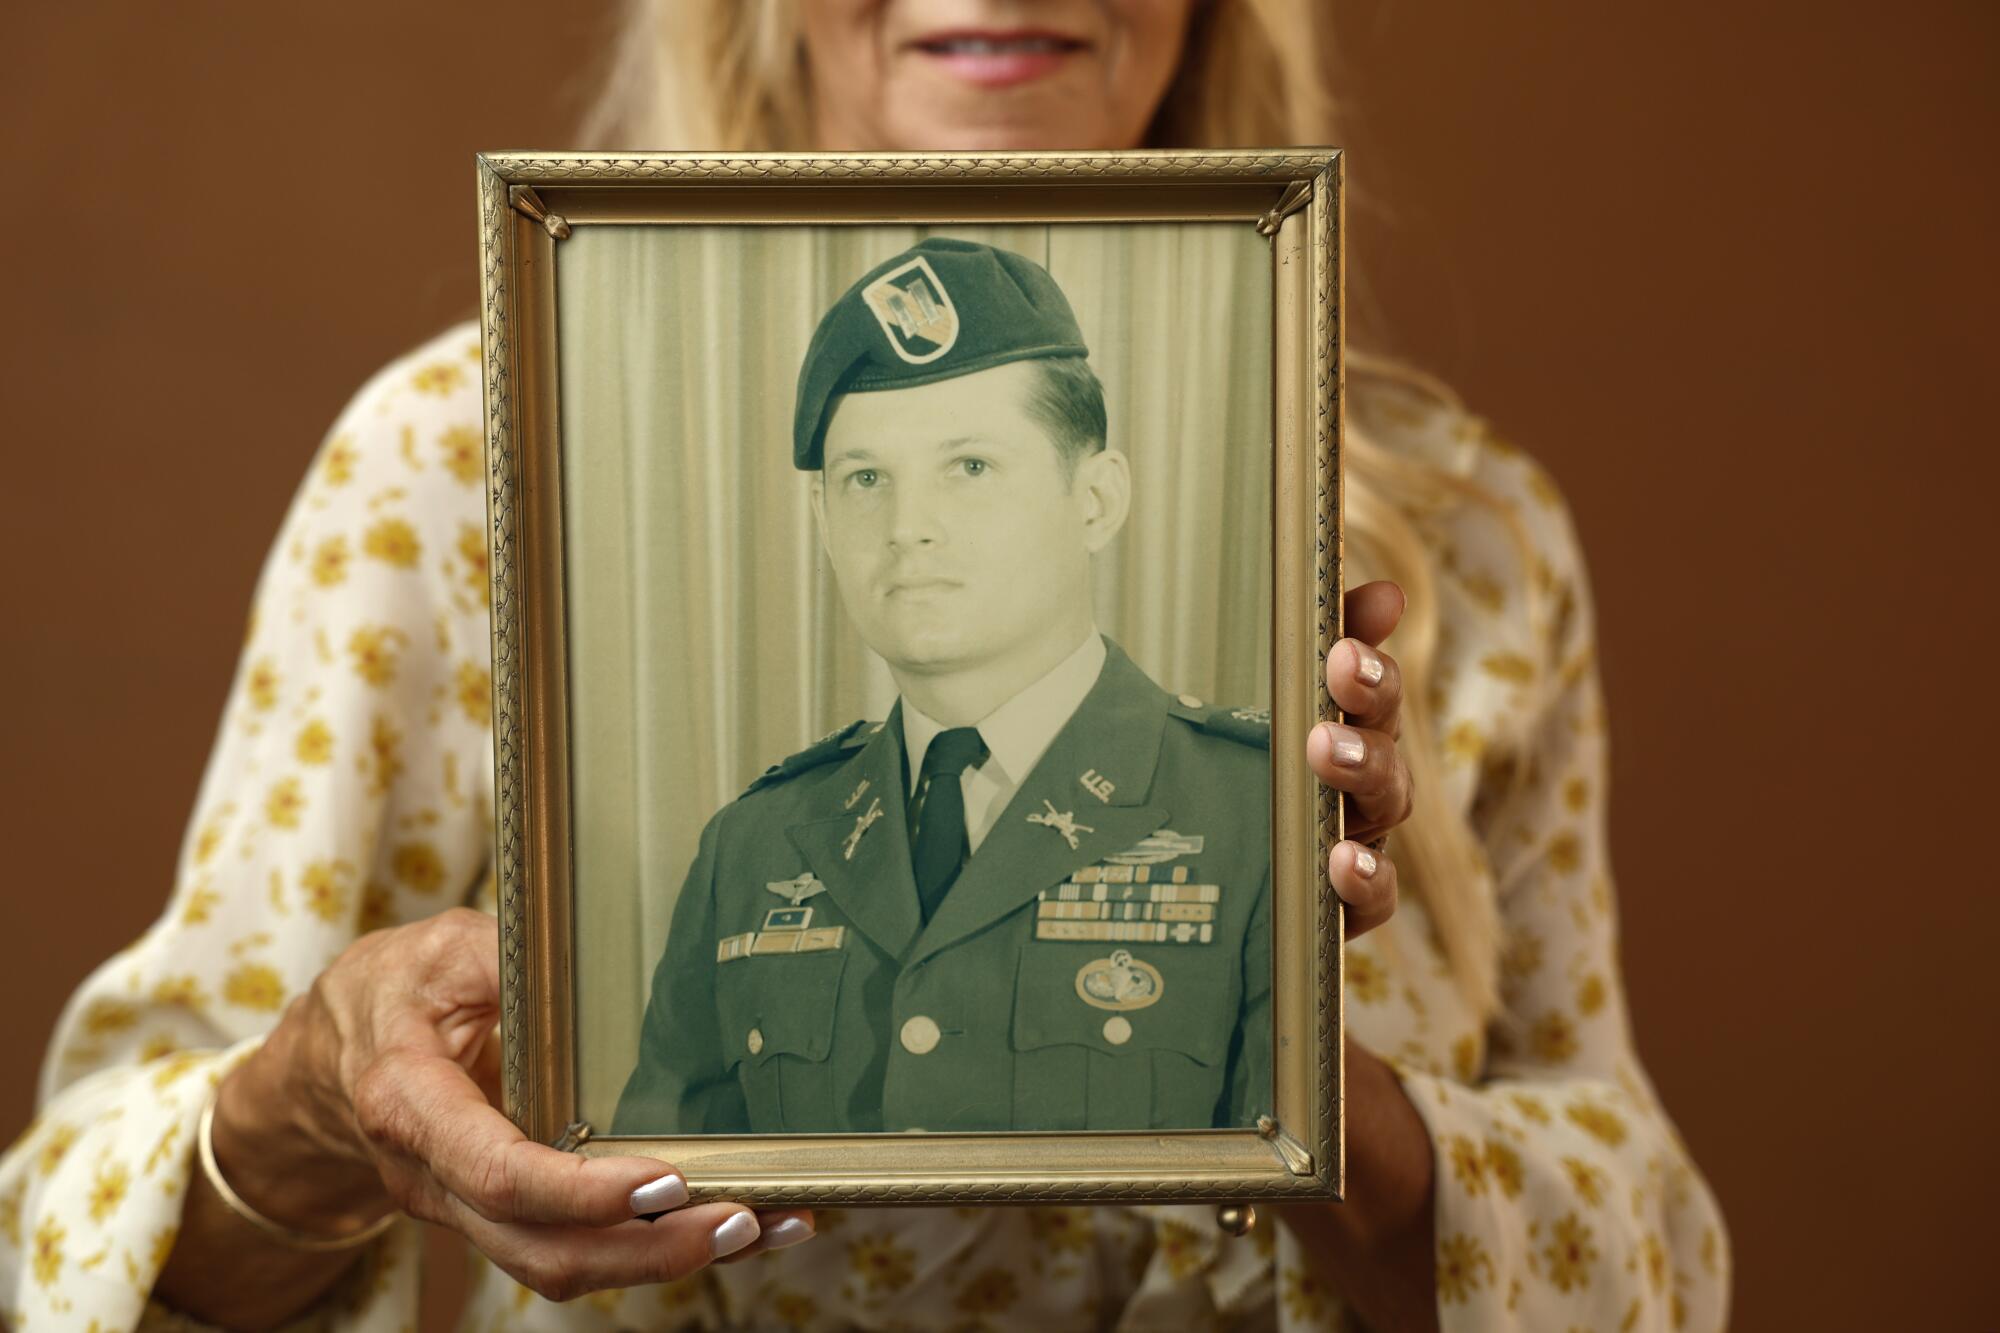 Kathy Ferrari holds a picture of her brother Jimmy Lewis, a CIA officer killed in the 1983 Beirut embassy bombing